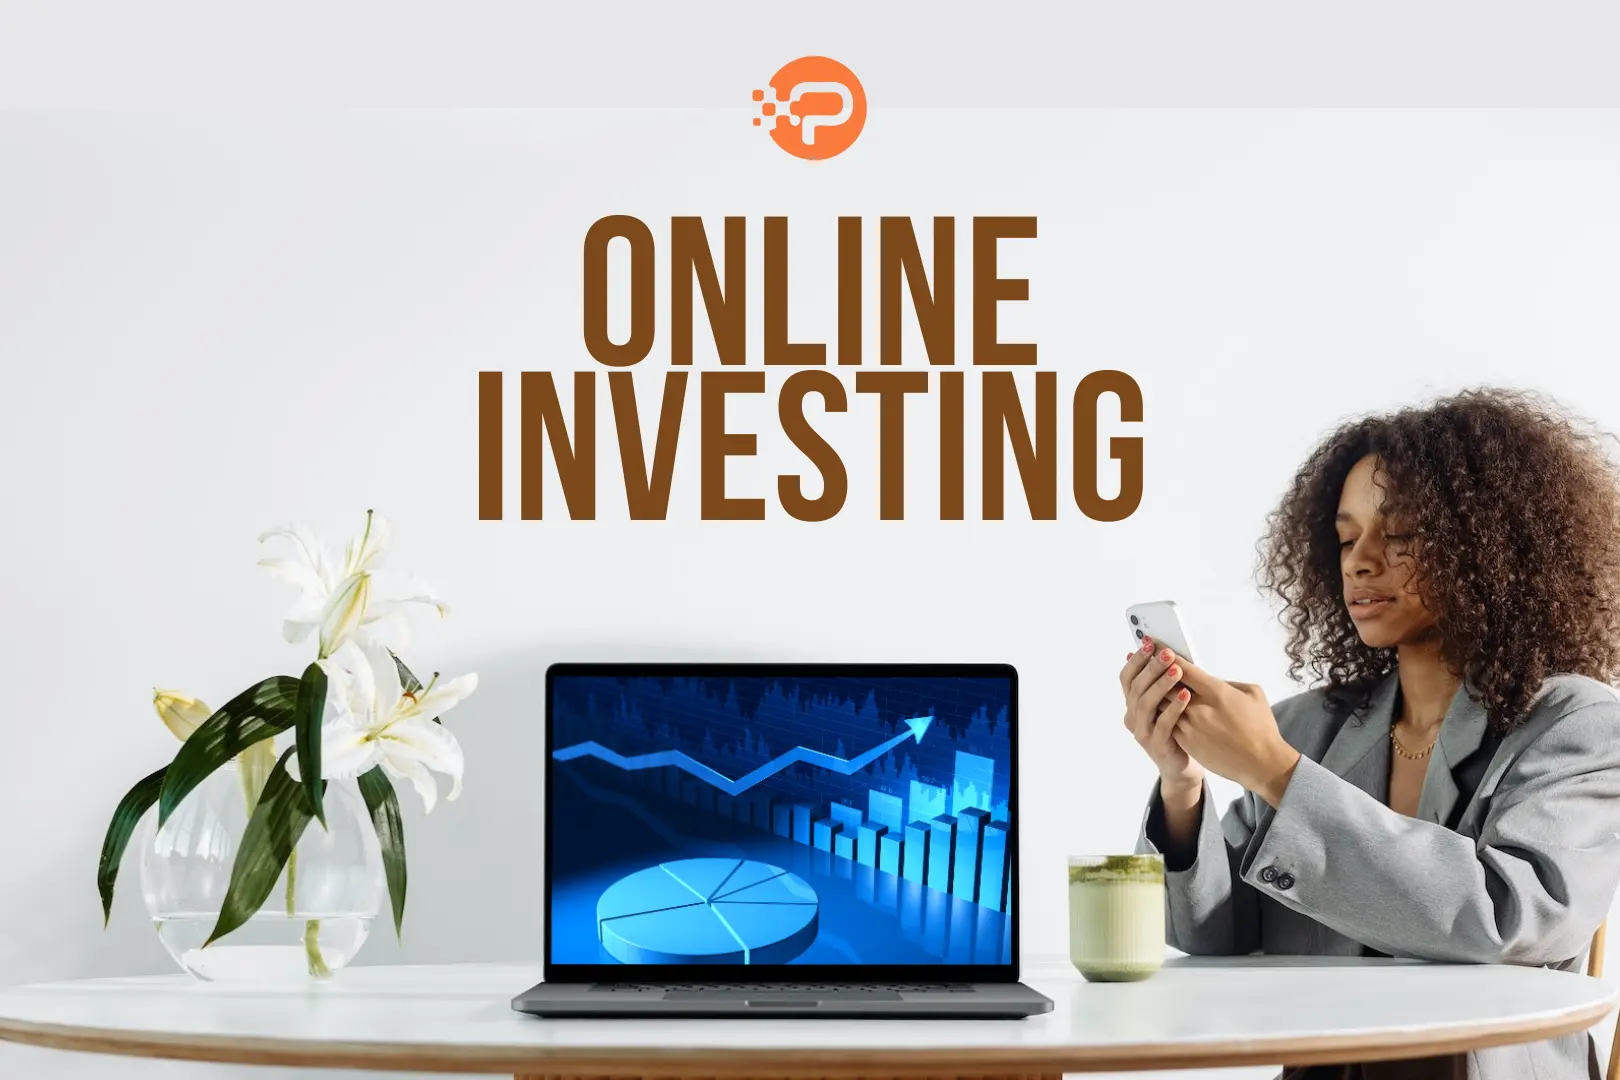 What is Online Investing?